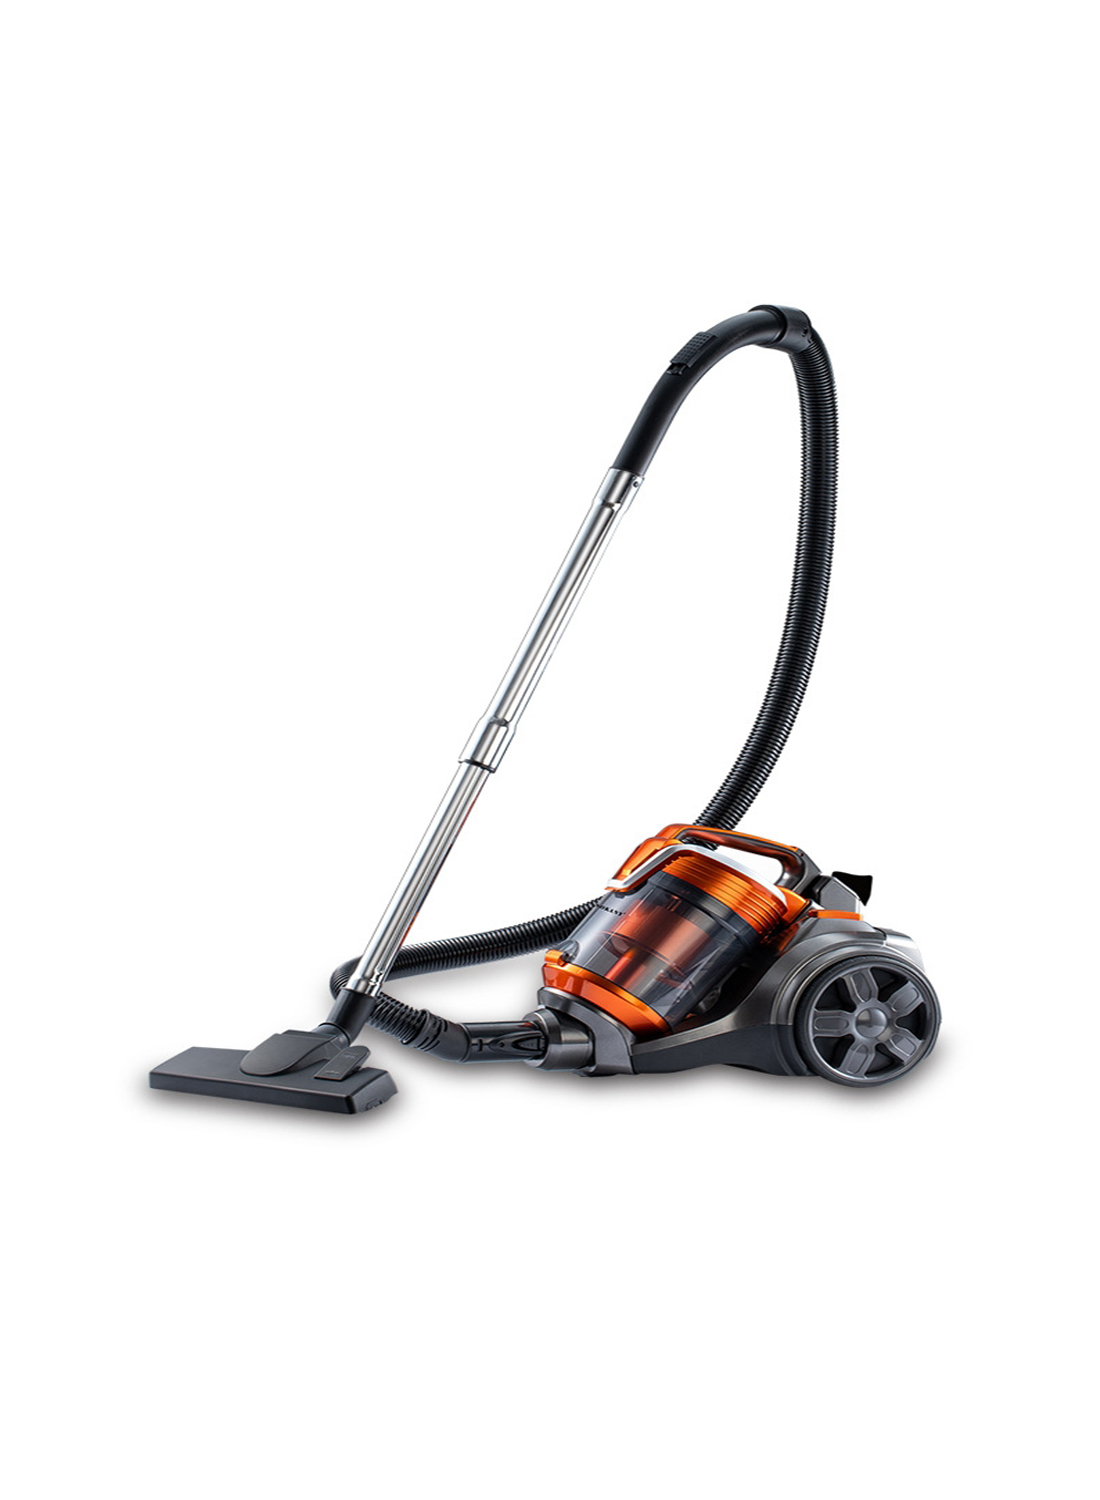 Canister Vacuums 3.5L 3600W SK-13004